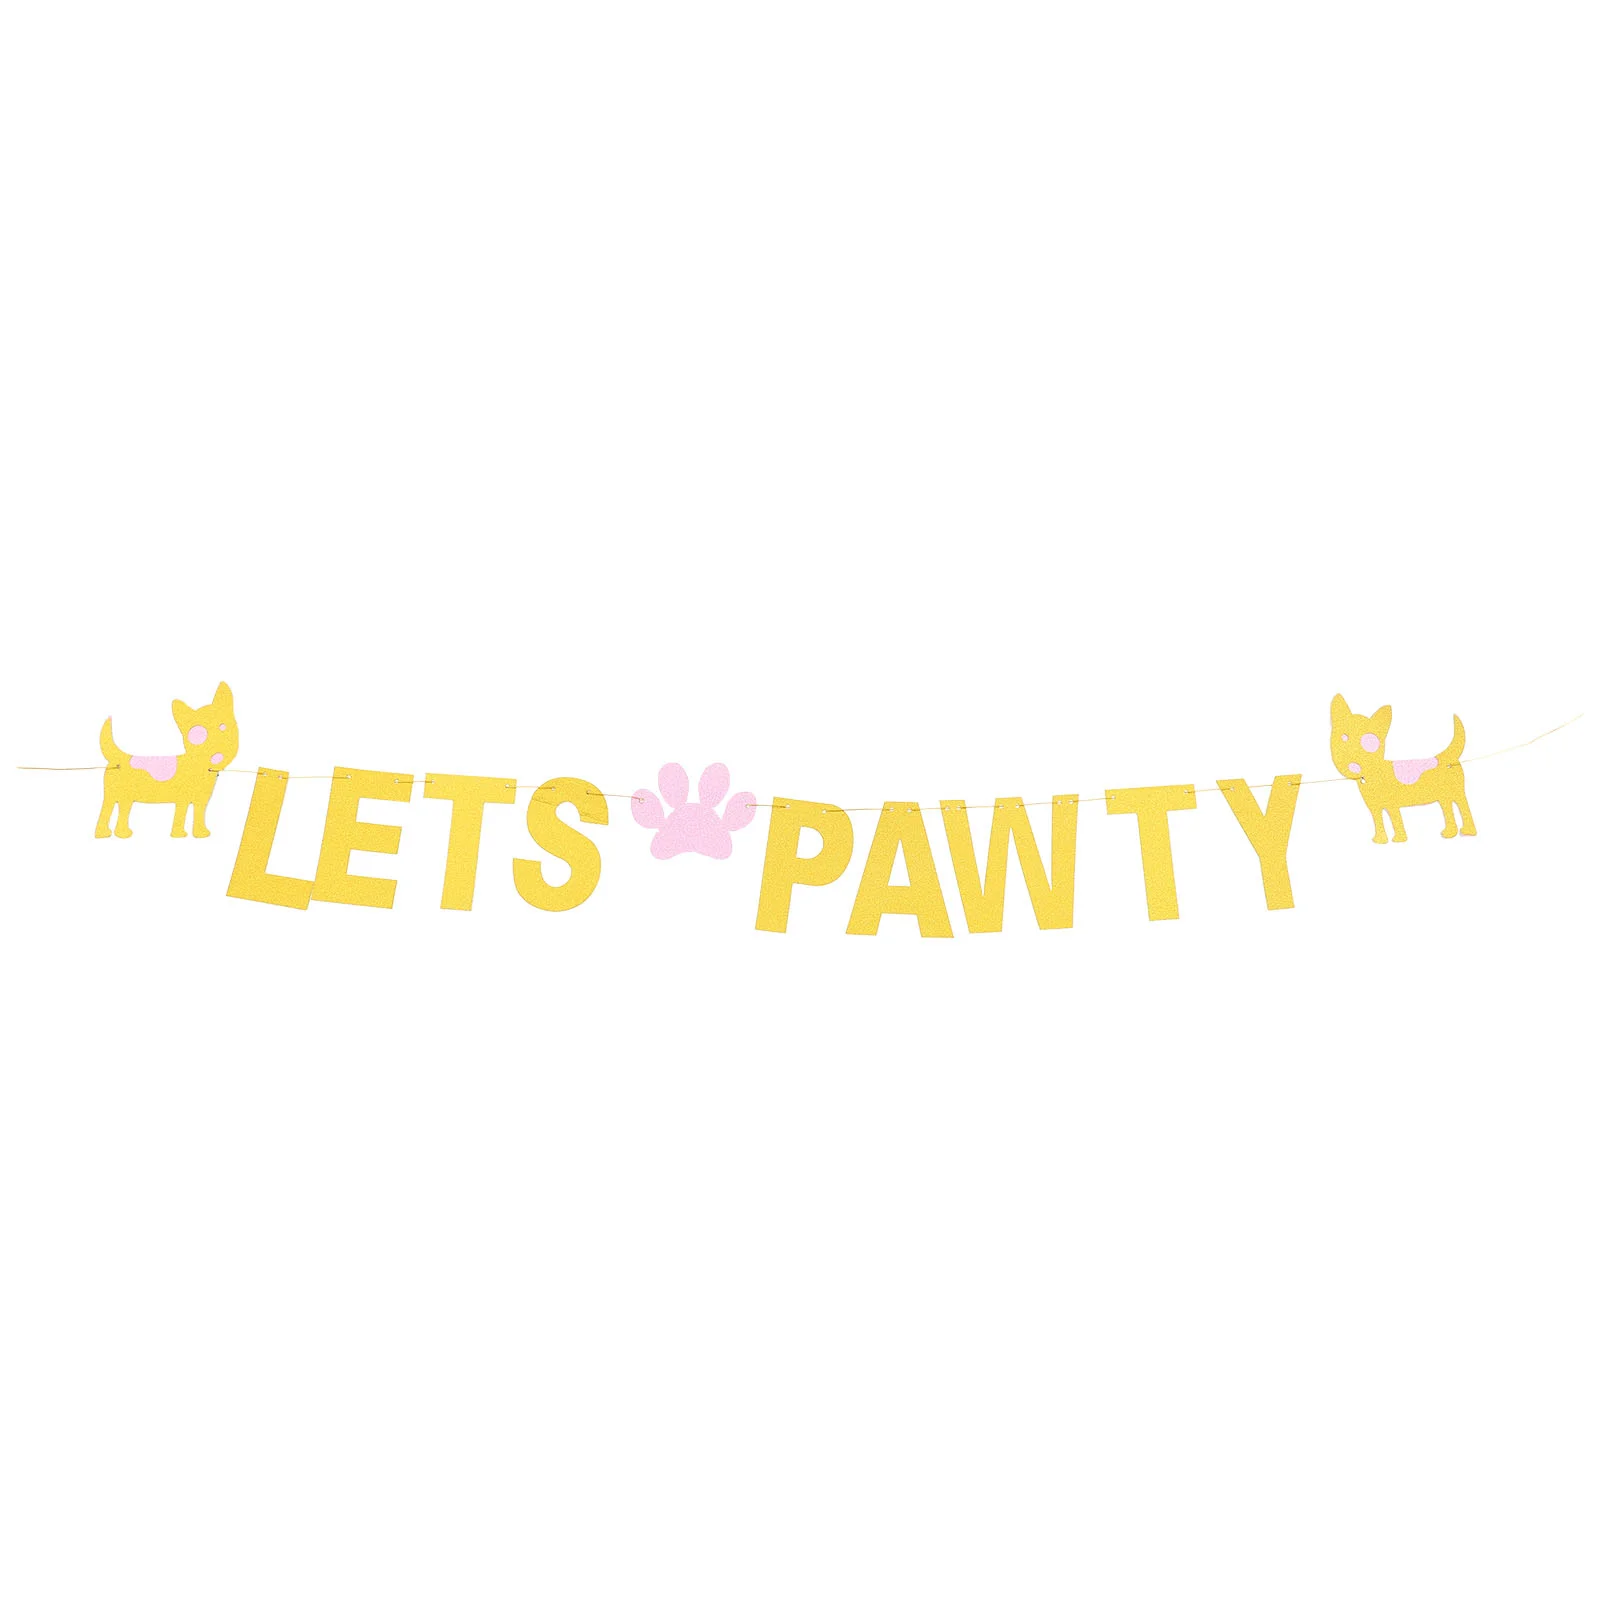 

Birthday Banner Pawty Party Dog Lets Petdecorations Let Supplies Garland Sign Decor Catglitter Happy Kitten Bunting Flag